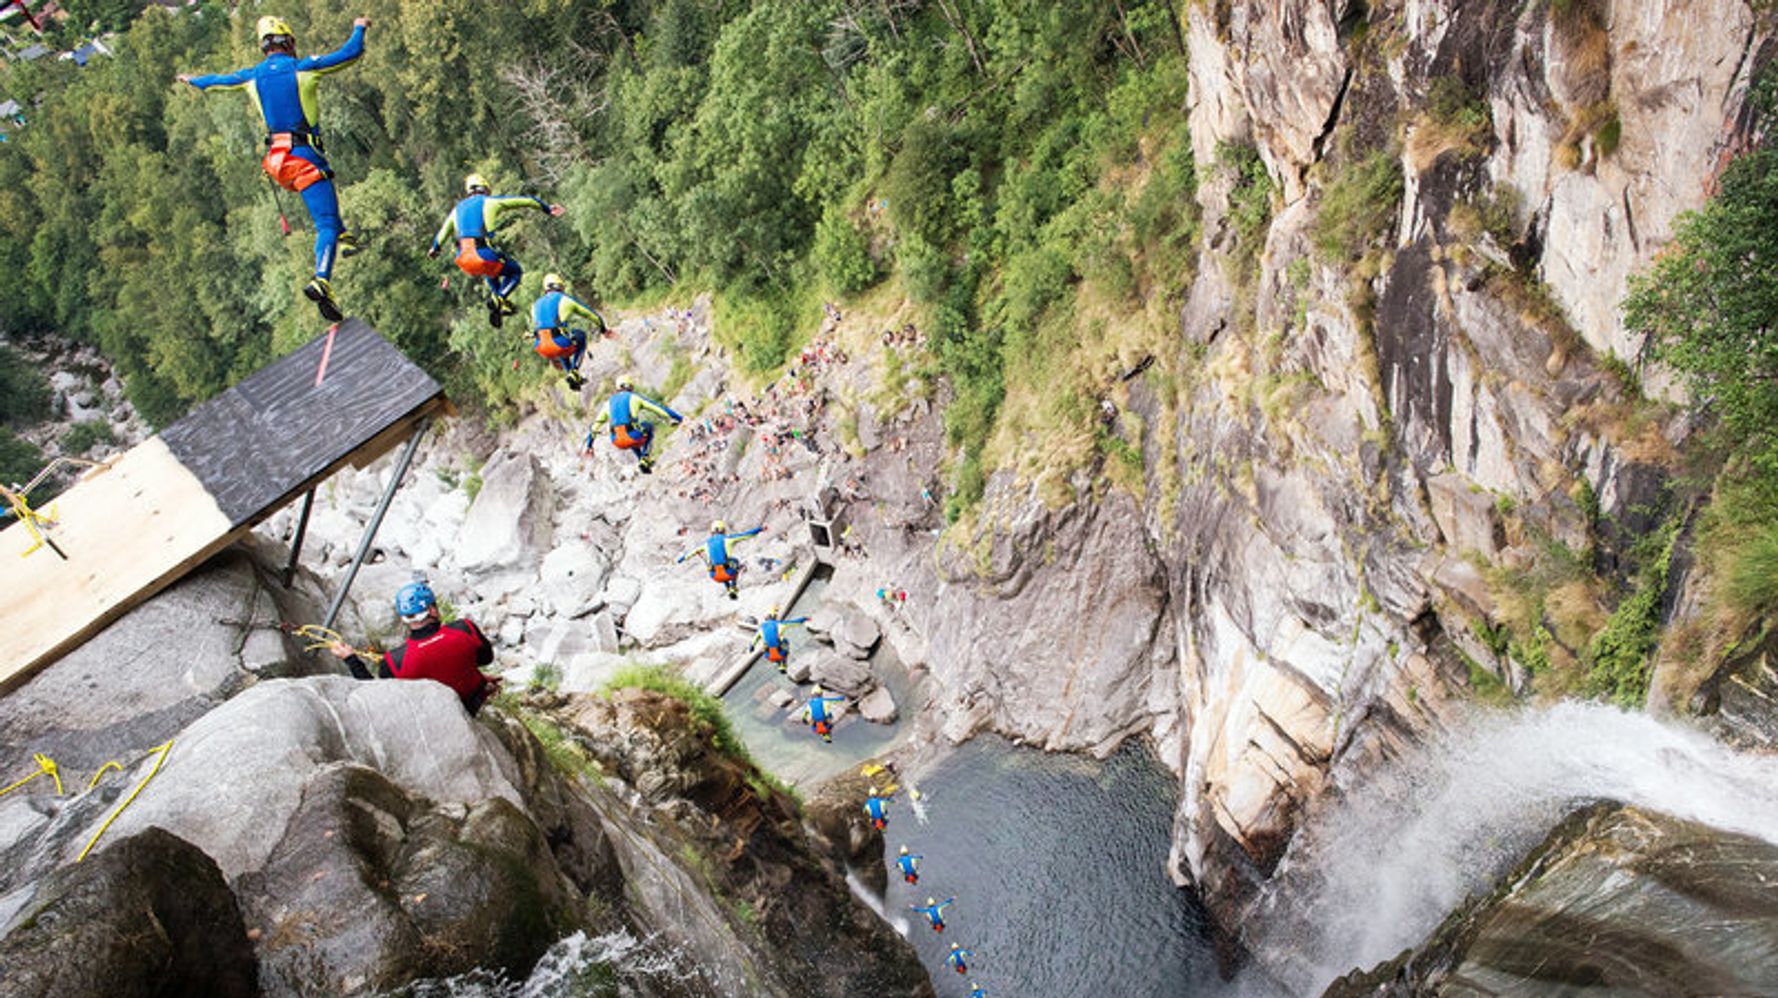 Daredevil Sets New World Record With 193-Foot Cliff Jump.